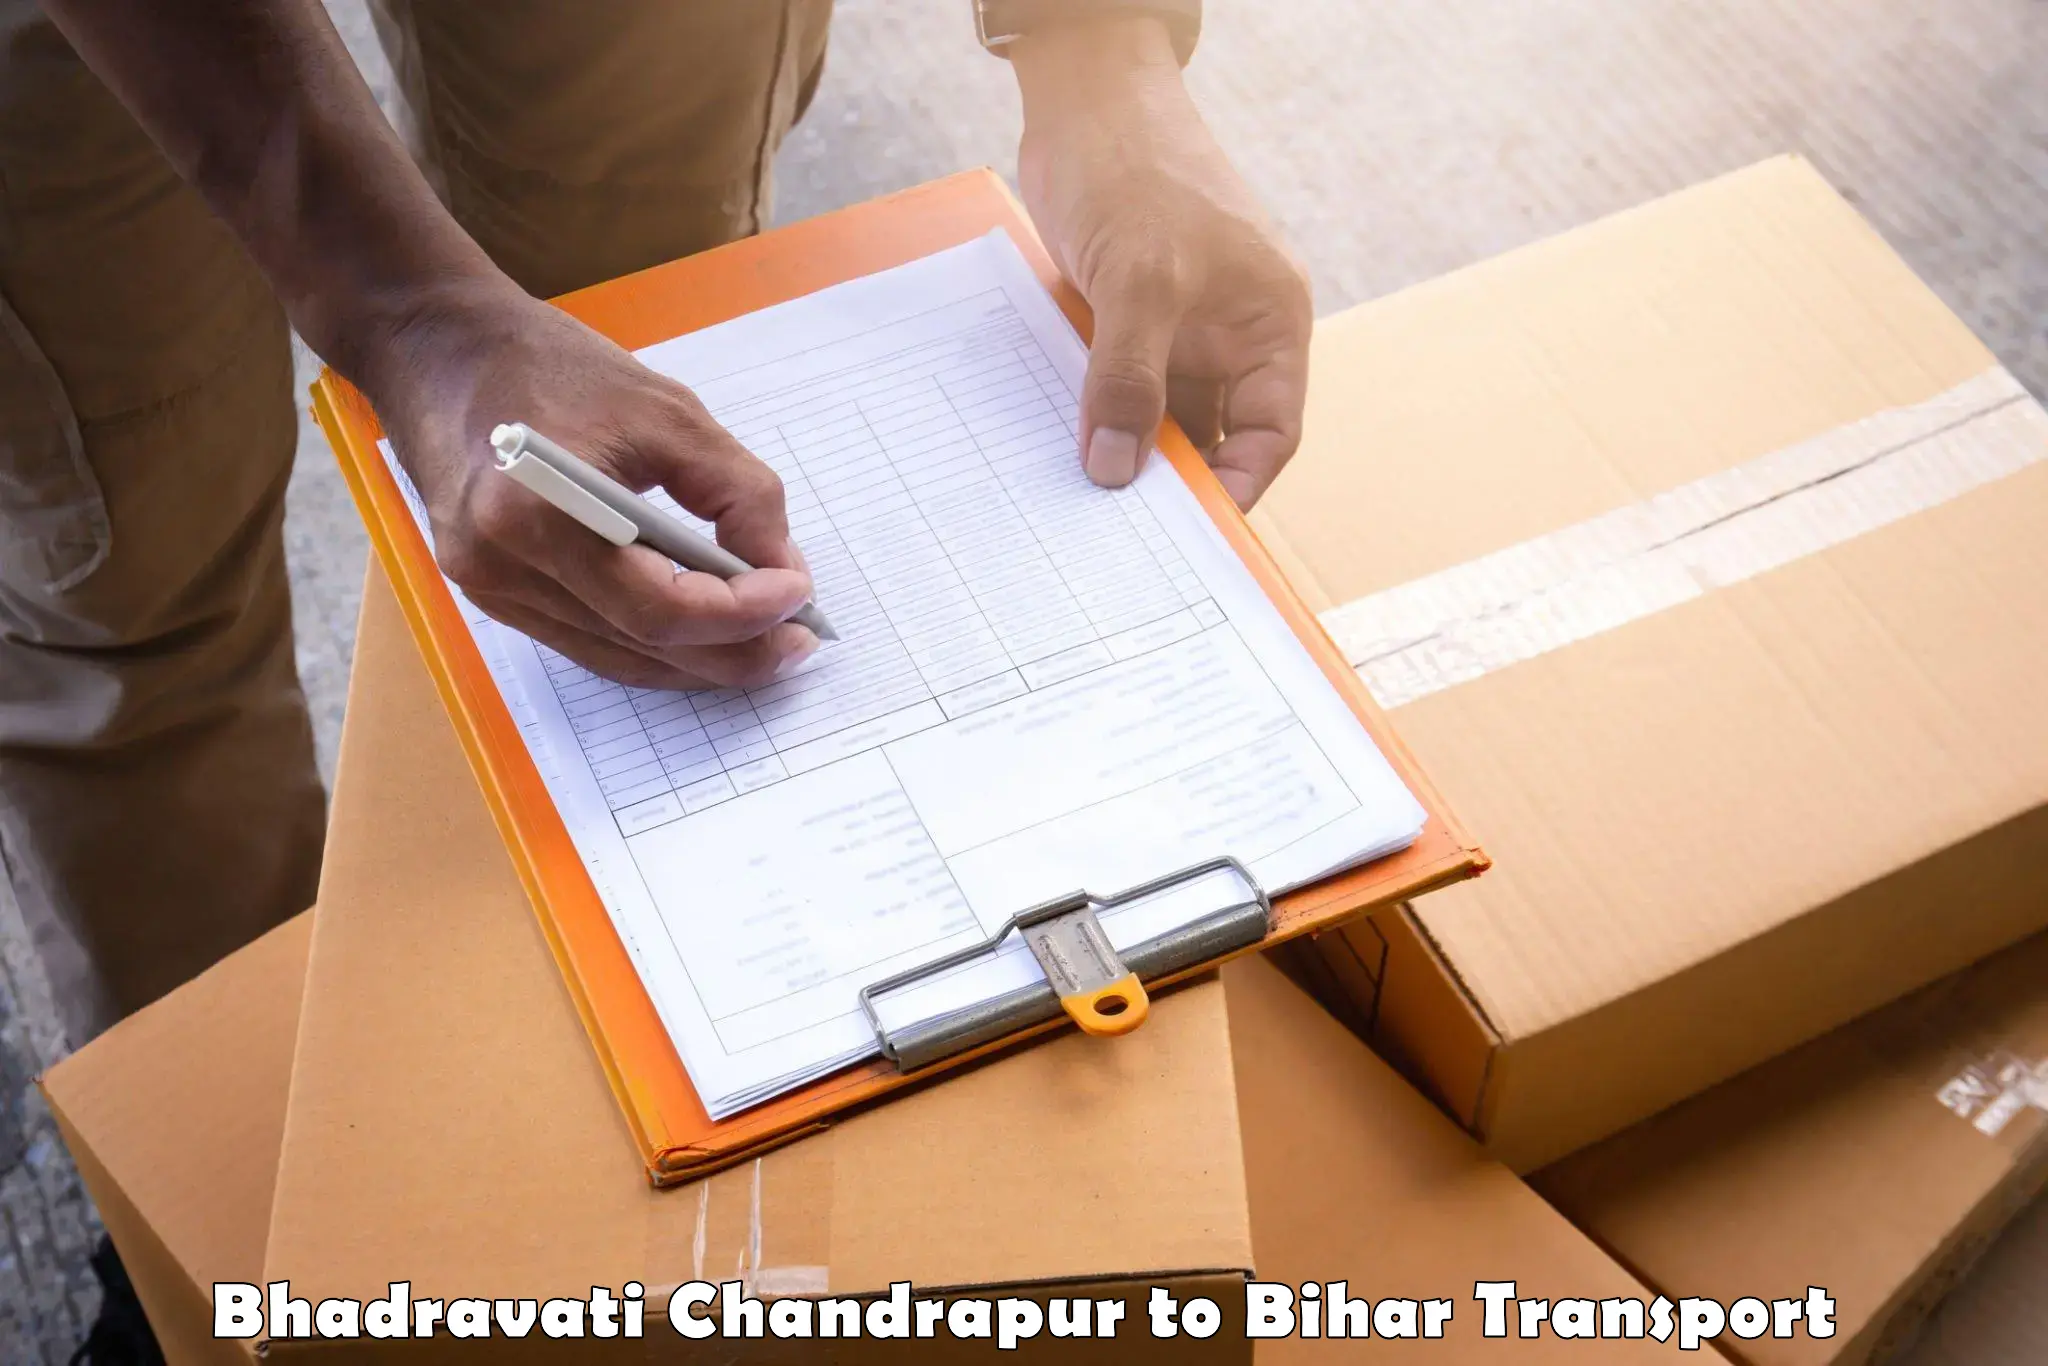 Goods delivery service in Bhadravati Chandrapur to Dhaka